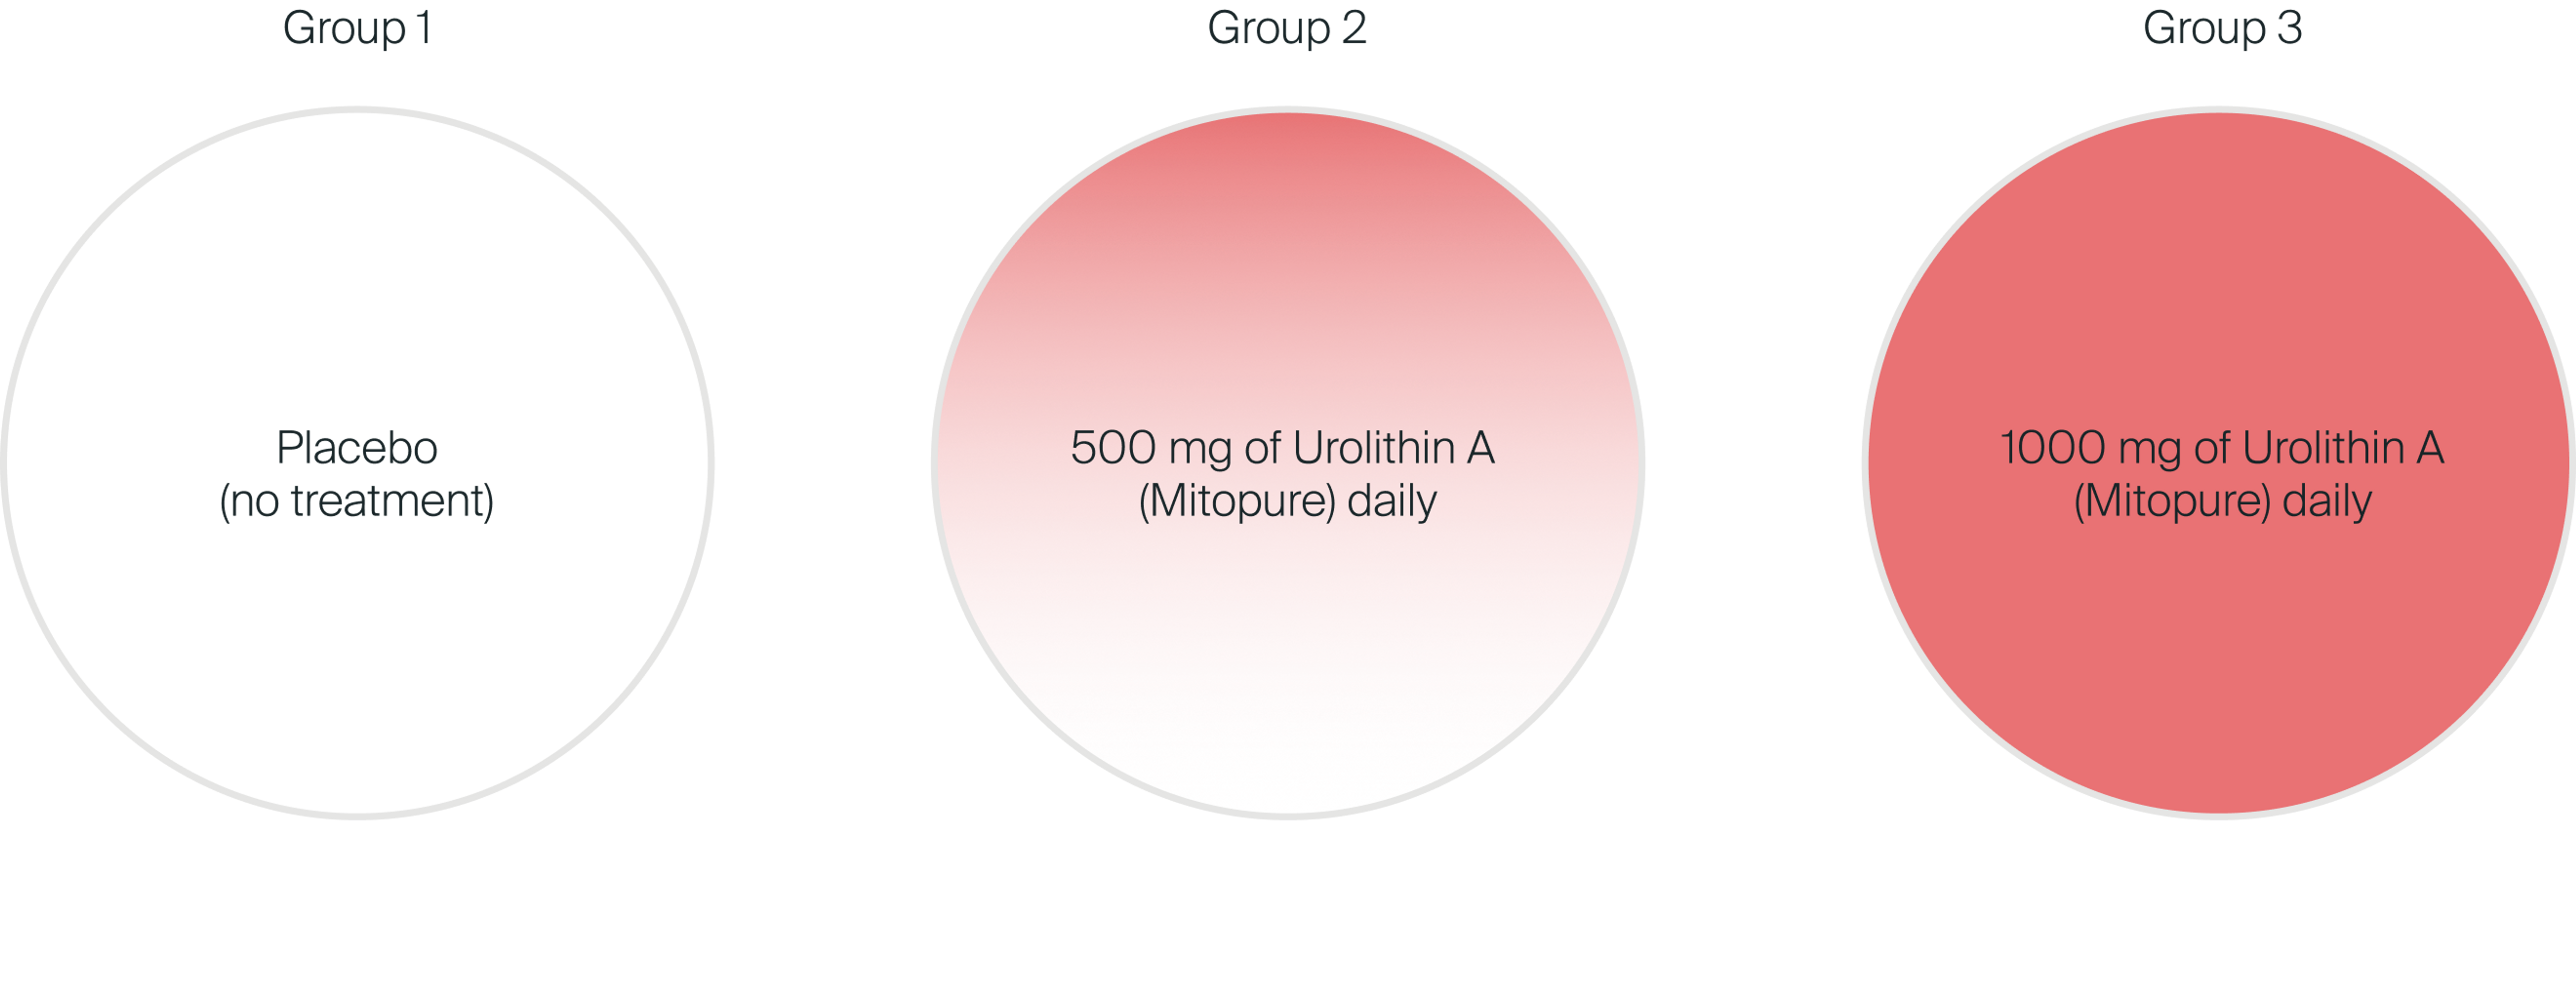 Control Group took placebo (no treatment), Group 2 took 500mg of Urolithin A (Mitopure) daily, Group 3 took 1000mg of Urolithin A (Mitopure) daily